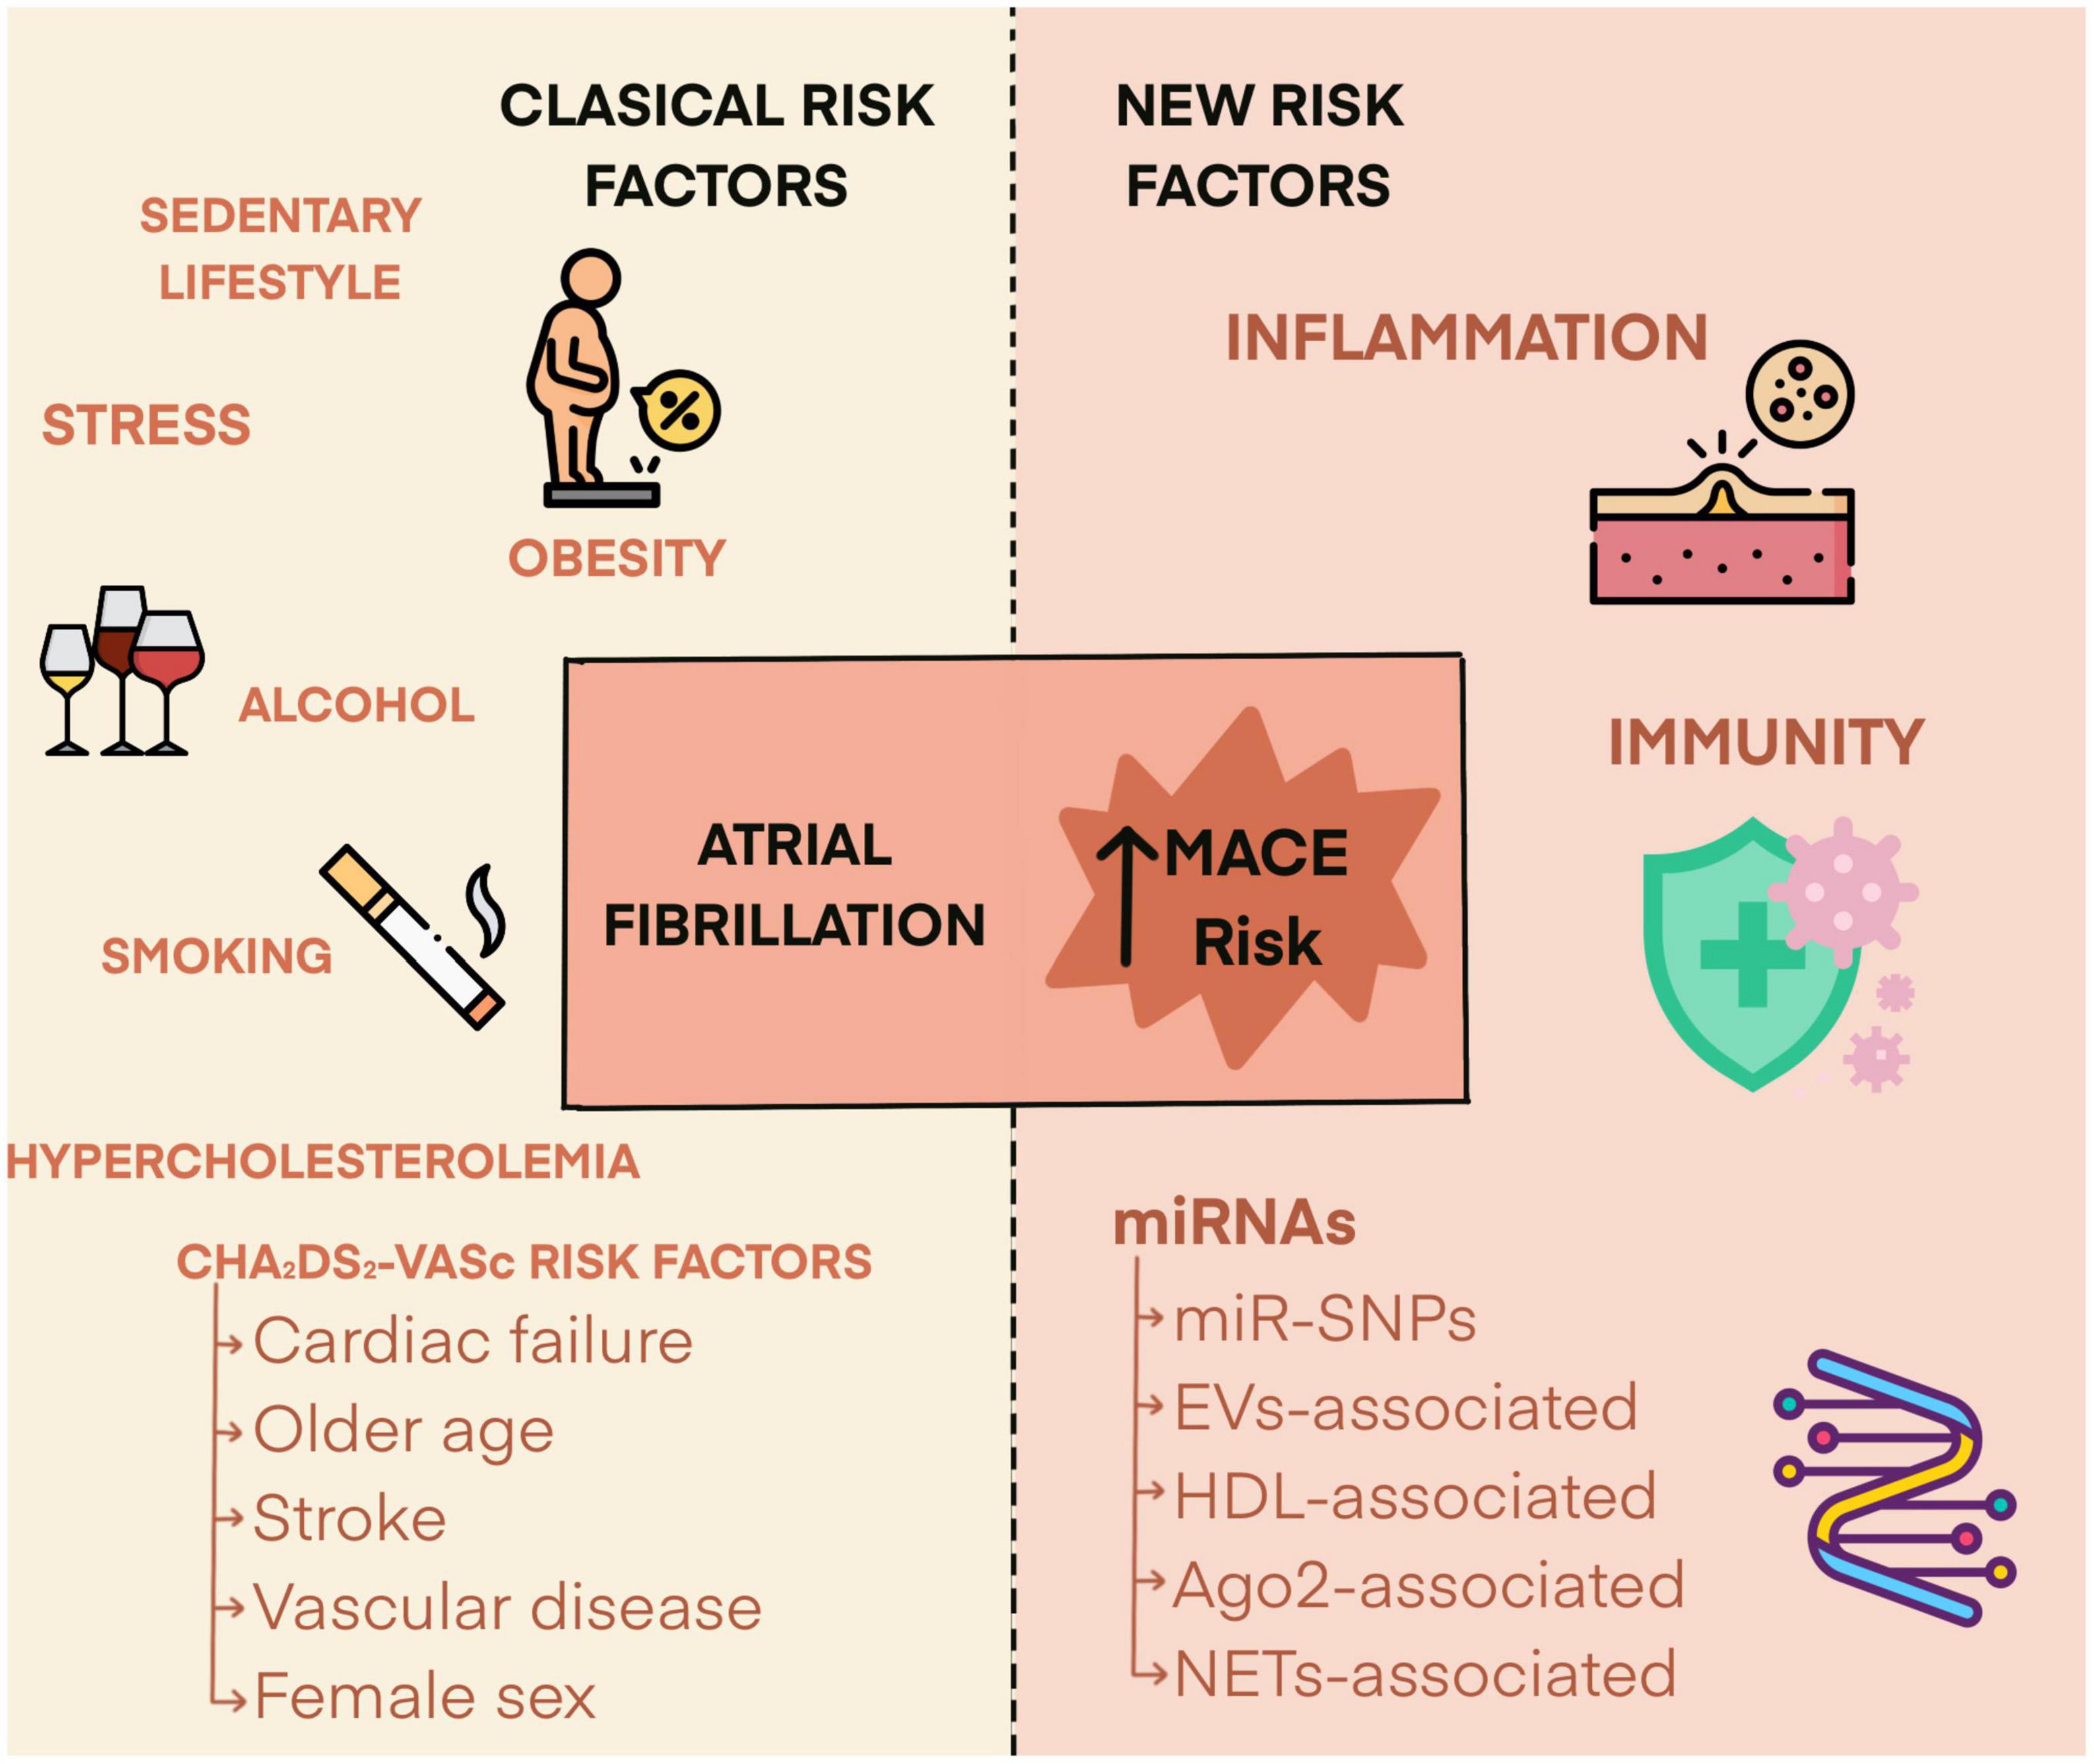 microRNAs as biomarkers of risk of major adverse cardiovascular events in atrial fibrillation